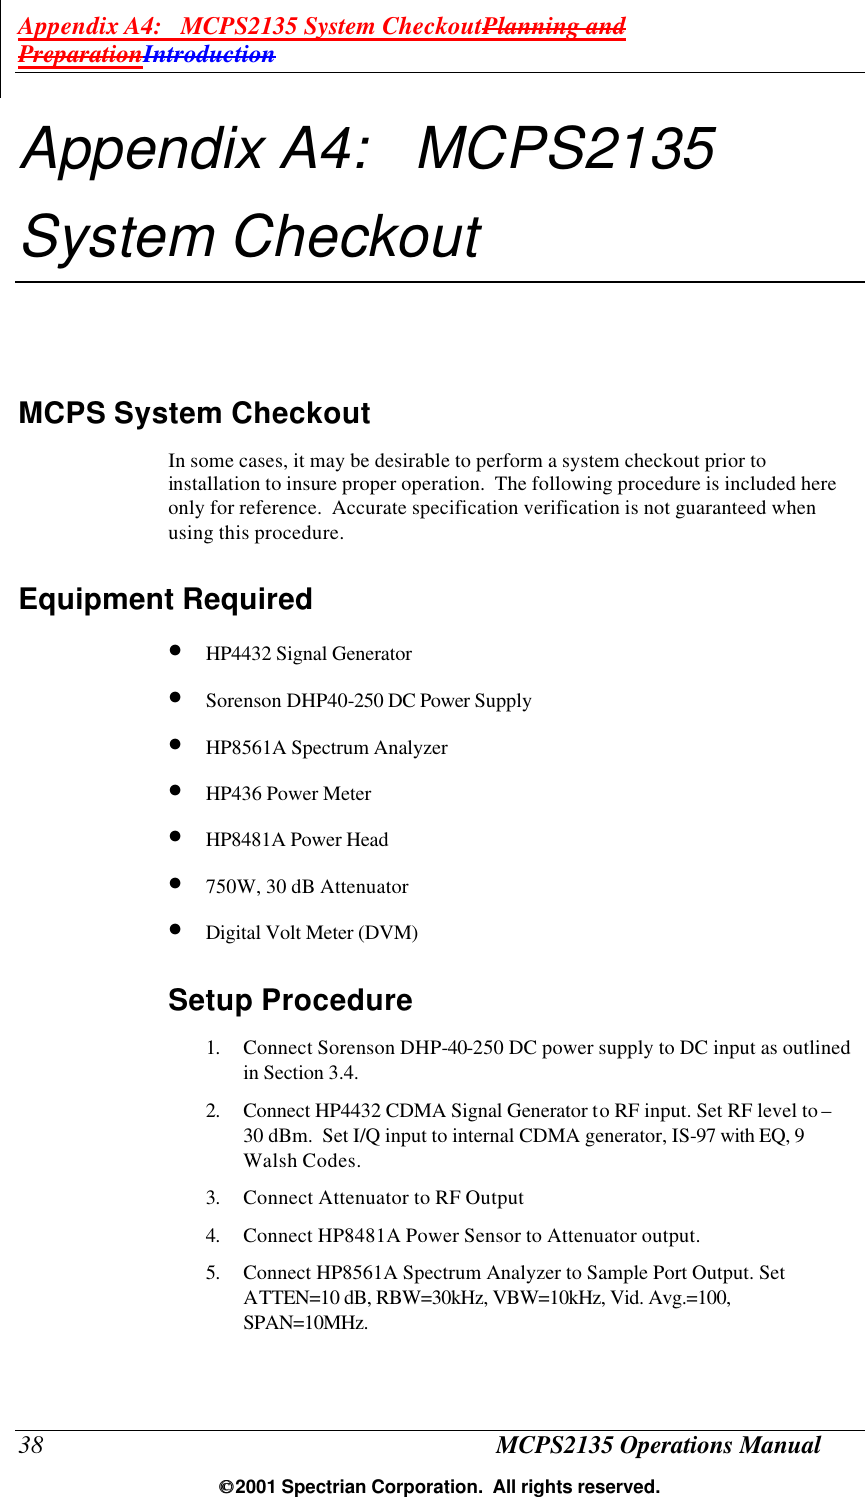 Appendix A4:   MCPS2135 System CheckoutPlanning and PreparationIntroduction 38 MCPS2135 Operations Manual  2001 Spectrian Corporation.  All rights reserved. Appendix A4:   MCPS2135 System Checkout MCPS System Checkout In some cases, it may be desirable to perform a system checkout prior to installation to insure proper operation.  The following procedure is included here only for reference.  Accurate specification verification is not guaranteed when using this procedure.   Equipment Required • HP4432 Signal Generator • Sorenson DHP40-250 DC Power Supply • HP8561A Spectrum Analyzer • HP436 Power Meter • HP8481A Power Head • 750W, 30 dB Attenuator • Digital Volt Meter (DVM) Setup Procedure 1. Connect Sorenson DHP-40-250 DC power supply to DC input as outlined in Section 3.4. 2. Connect HP4432 CDMA Signal Generator to RF input. Set RF level to –30 dBm.  Set I/Q input to internal CDMA generator, IS-97 with EQ, 9 Walsh Codes. 3. Connect Attenuator to RF Output 4. Connect HP8481A Power Sensor to Attenuator output. 5. Connect HP8561A Spectrum Analyzer to Sample Port Output. Set ATTEN=10 dB, RBW=30kHz, VBW=10kHz, Vid. Avg.=100, SPAN=10MHz. 